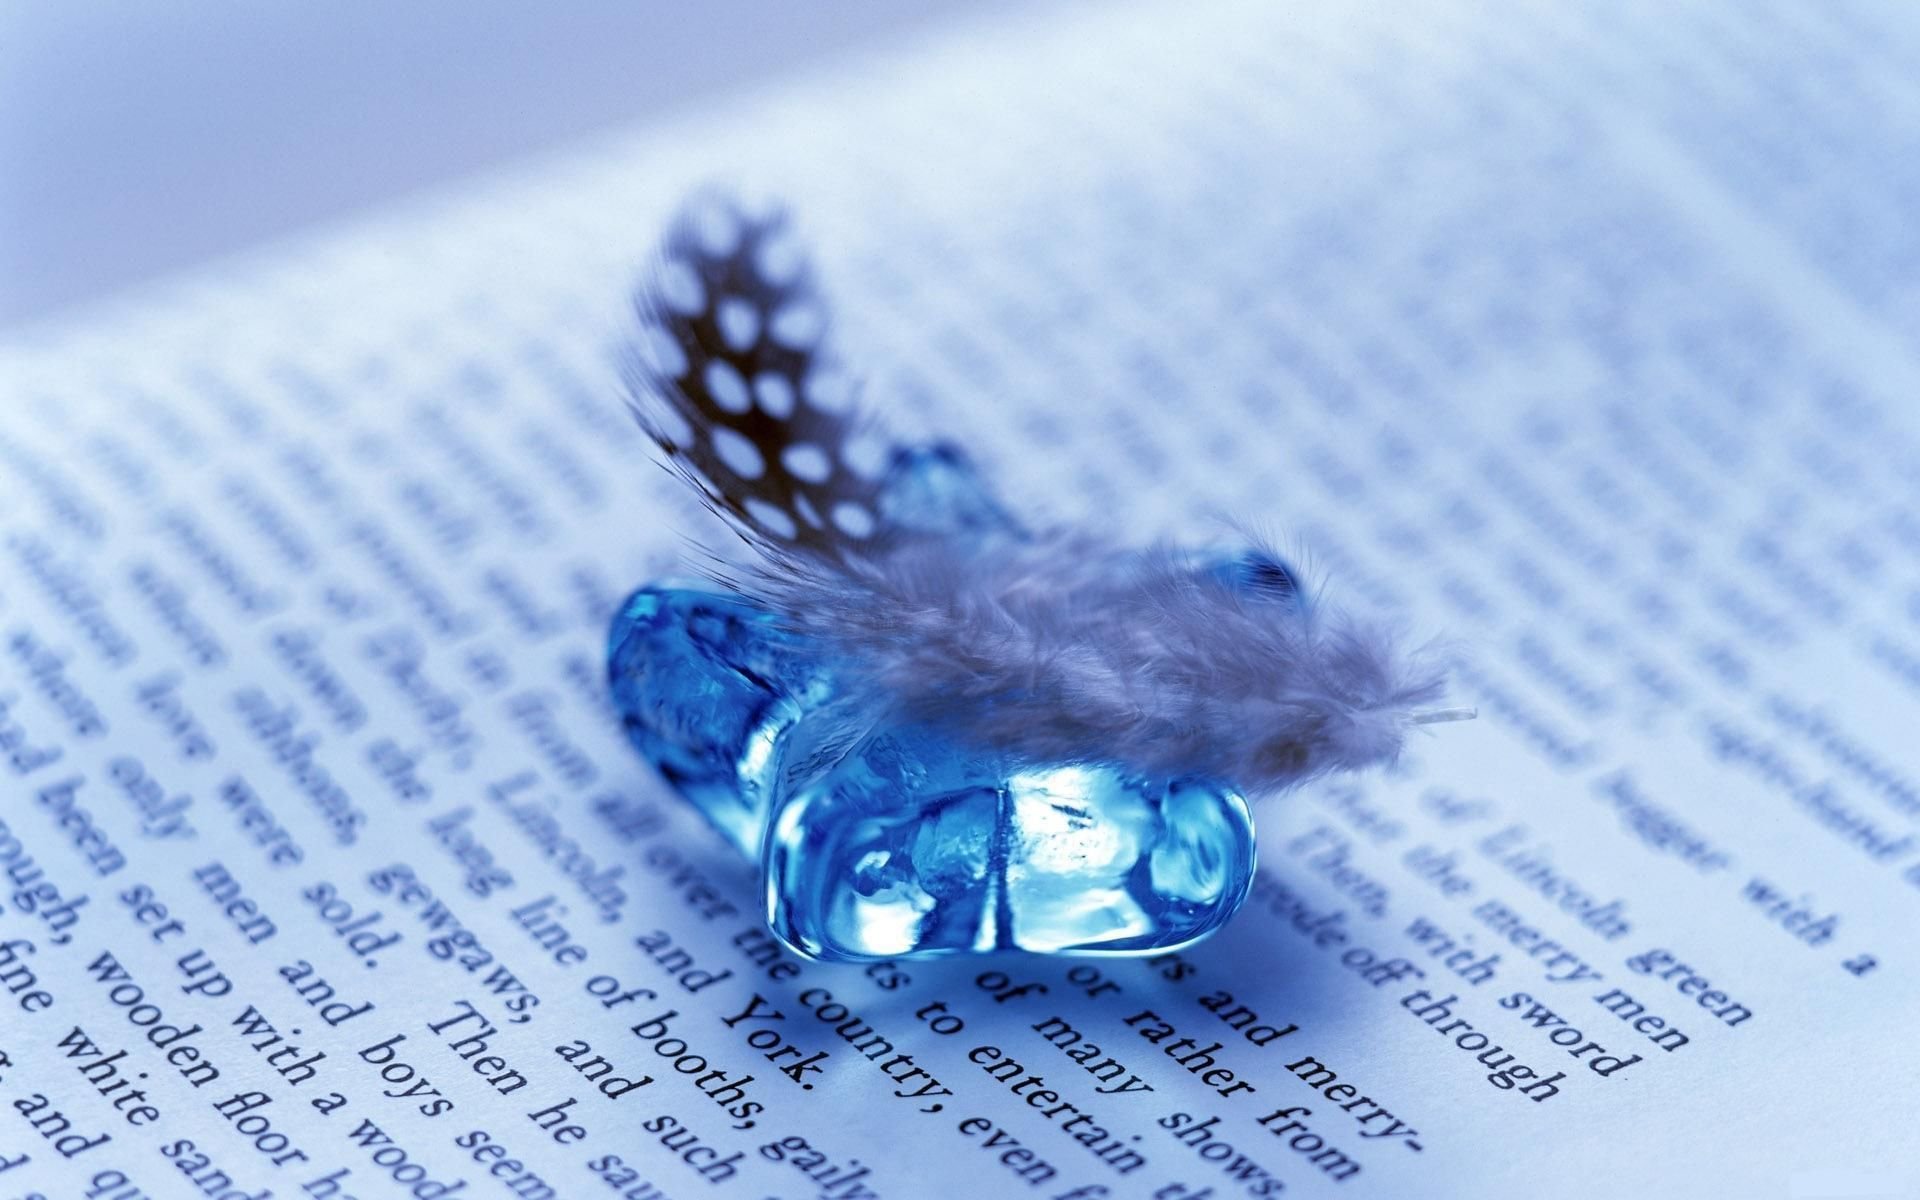 feather and gem on open book Wallpaper